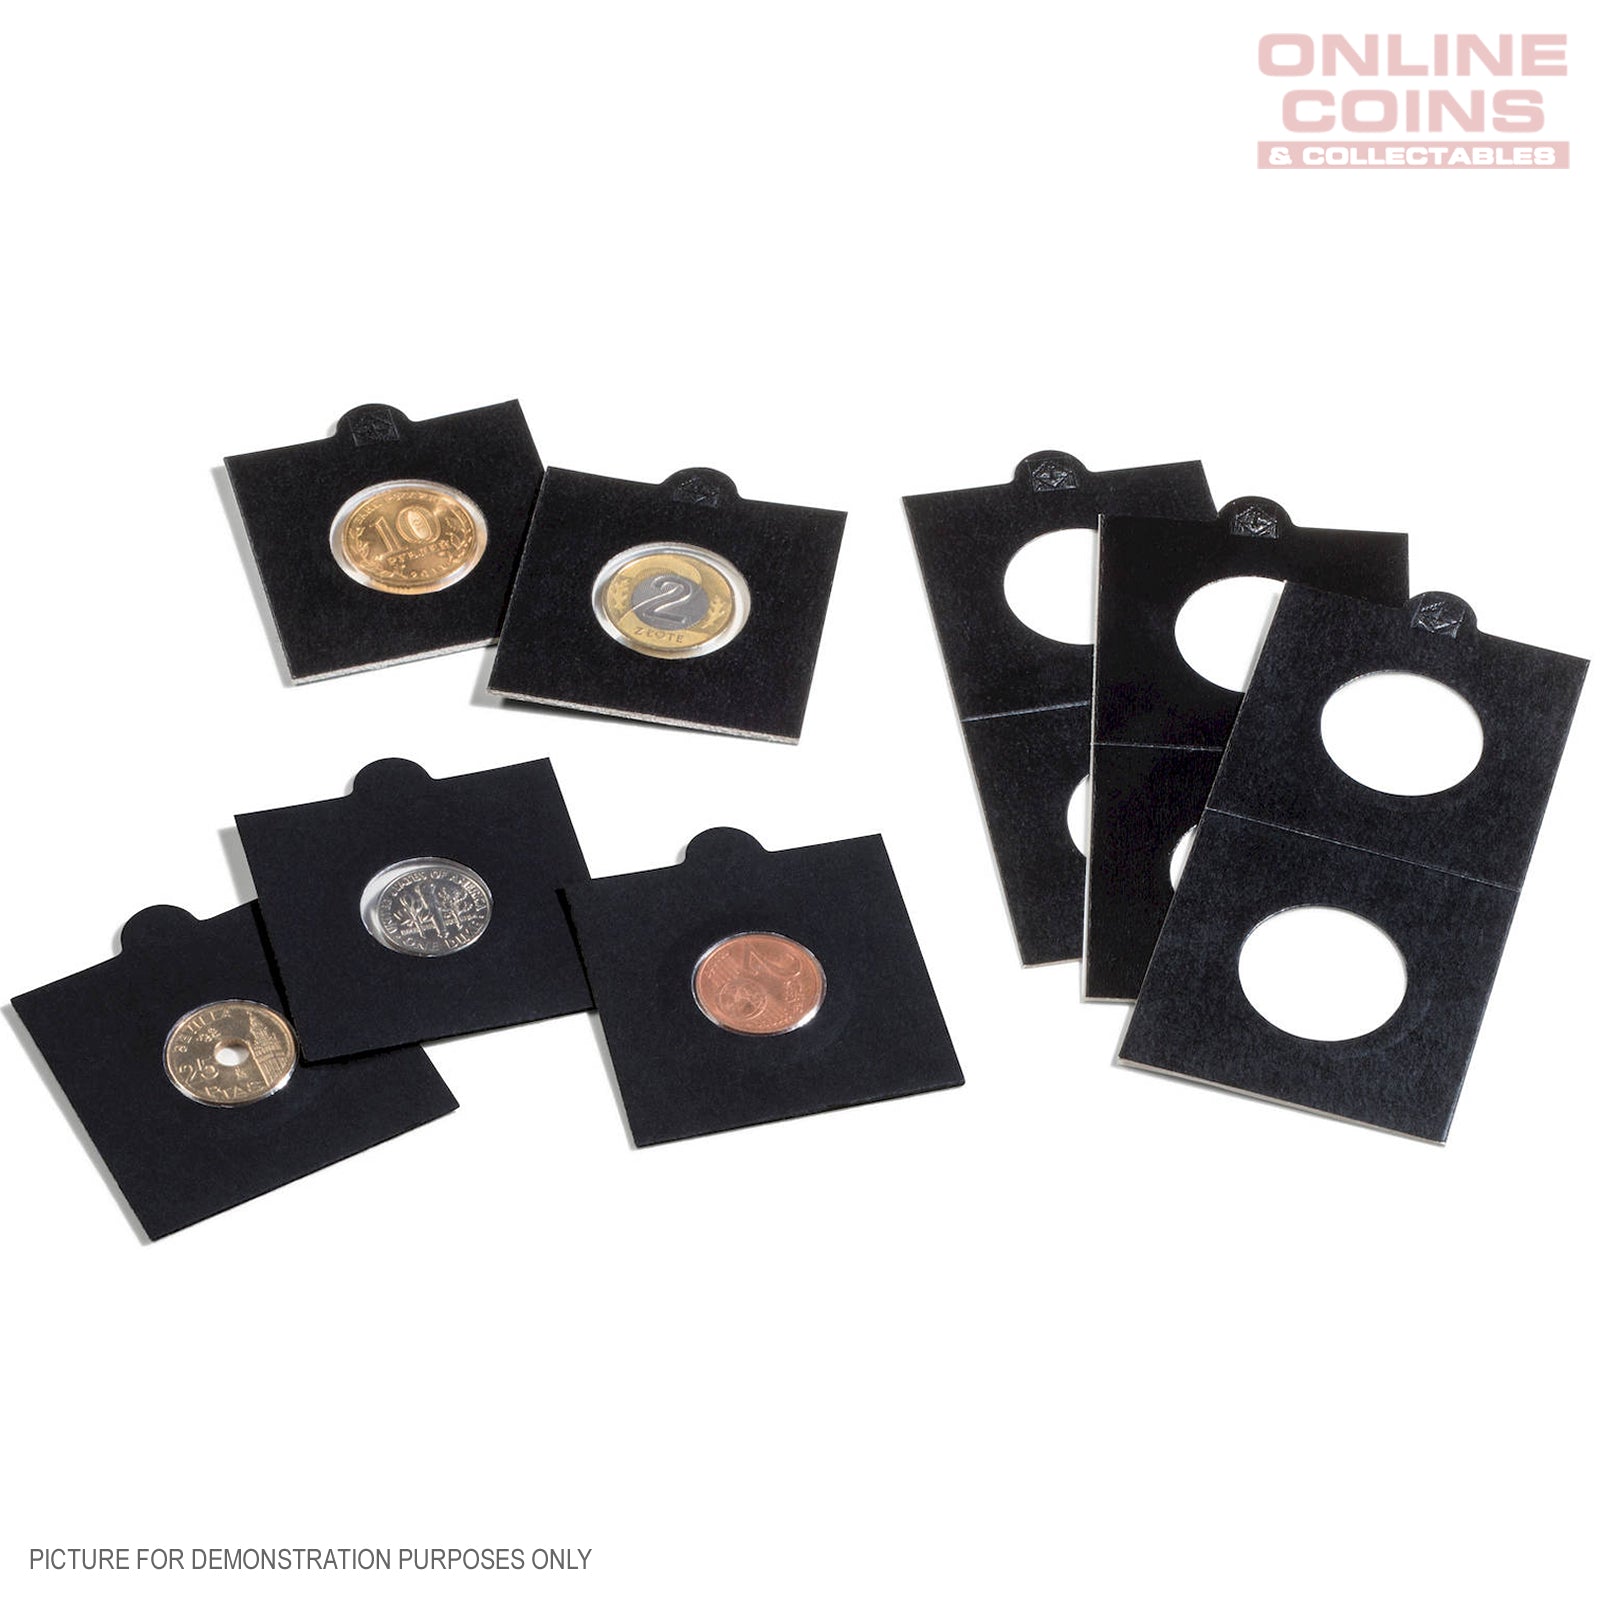 Lighthouse MATRIX BLACK 17.5mm Self Adhesive 2"x2" MATRIX Coin Holders x 25 (Suitable For Australian Threepence Coins)